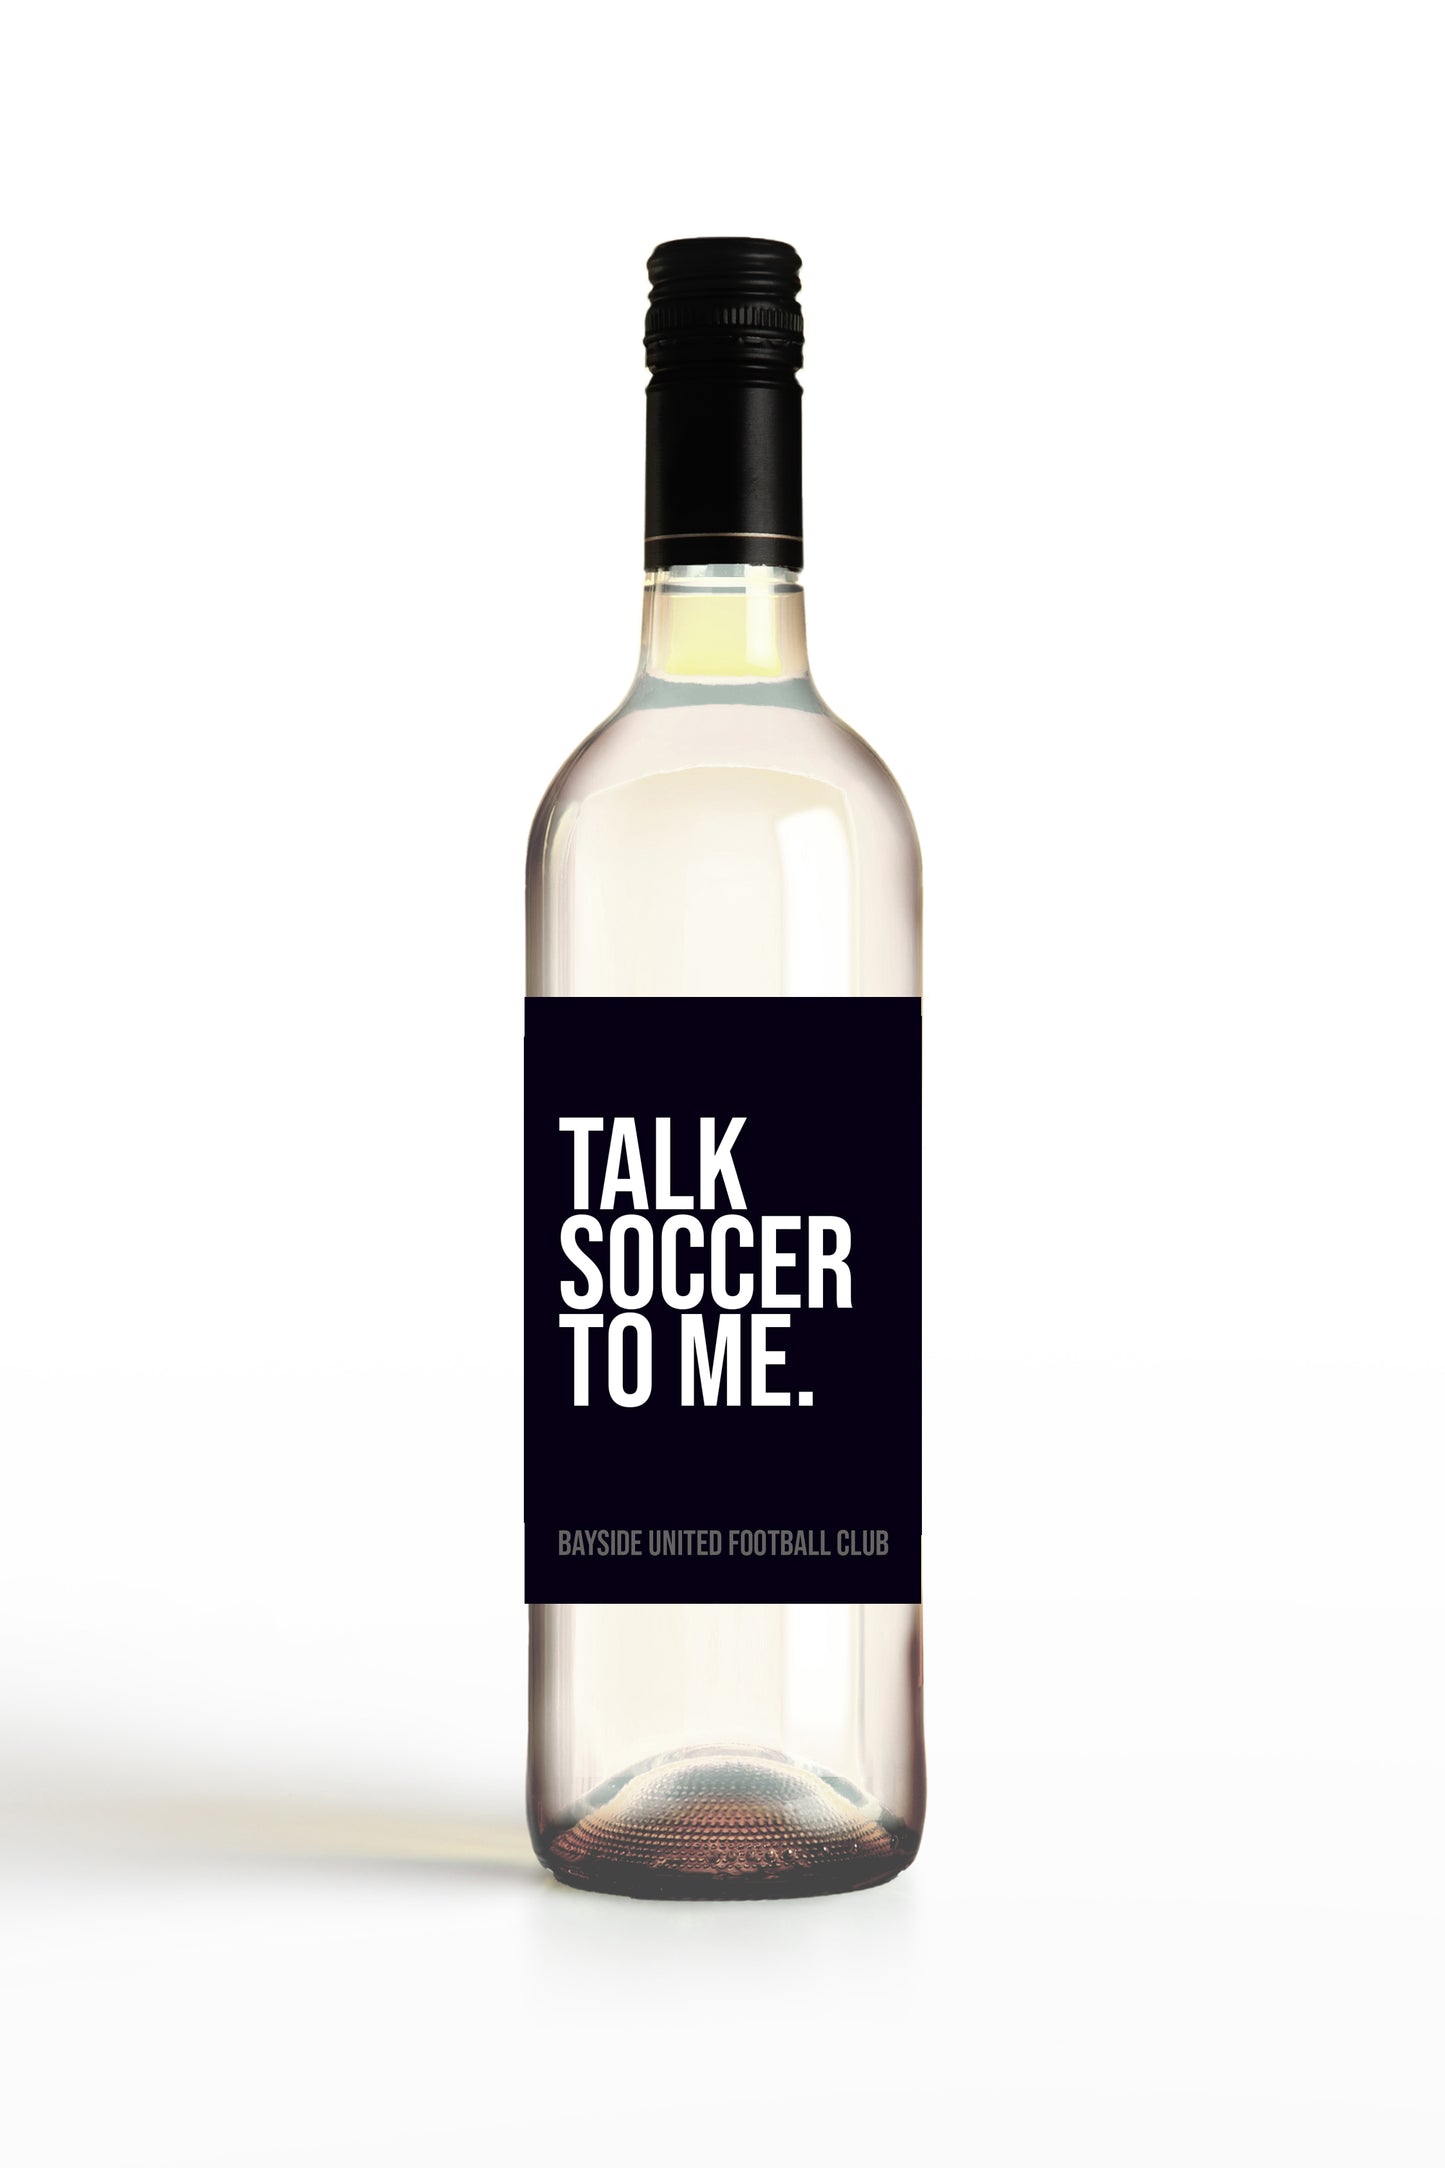 Talk Soccer To Me.